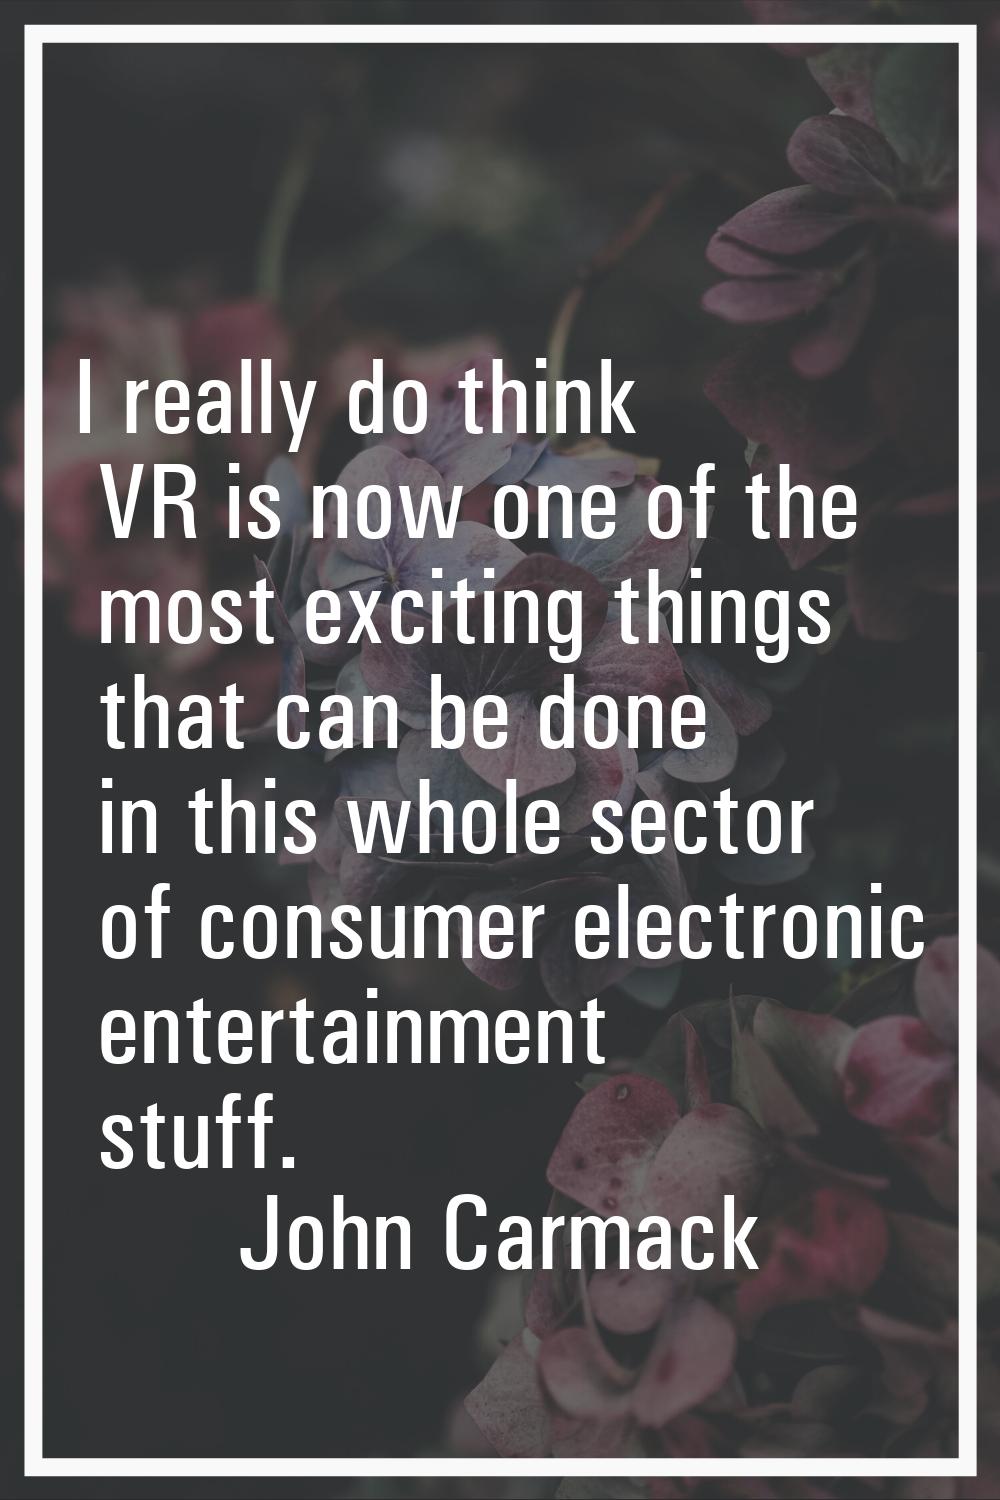 I really do think VR is now one of the most exciting things that can be done in this whole sector o